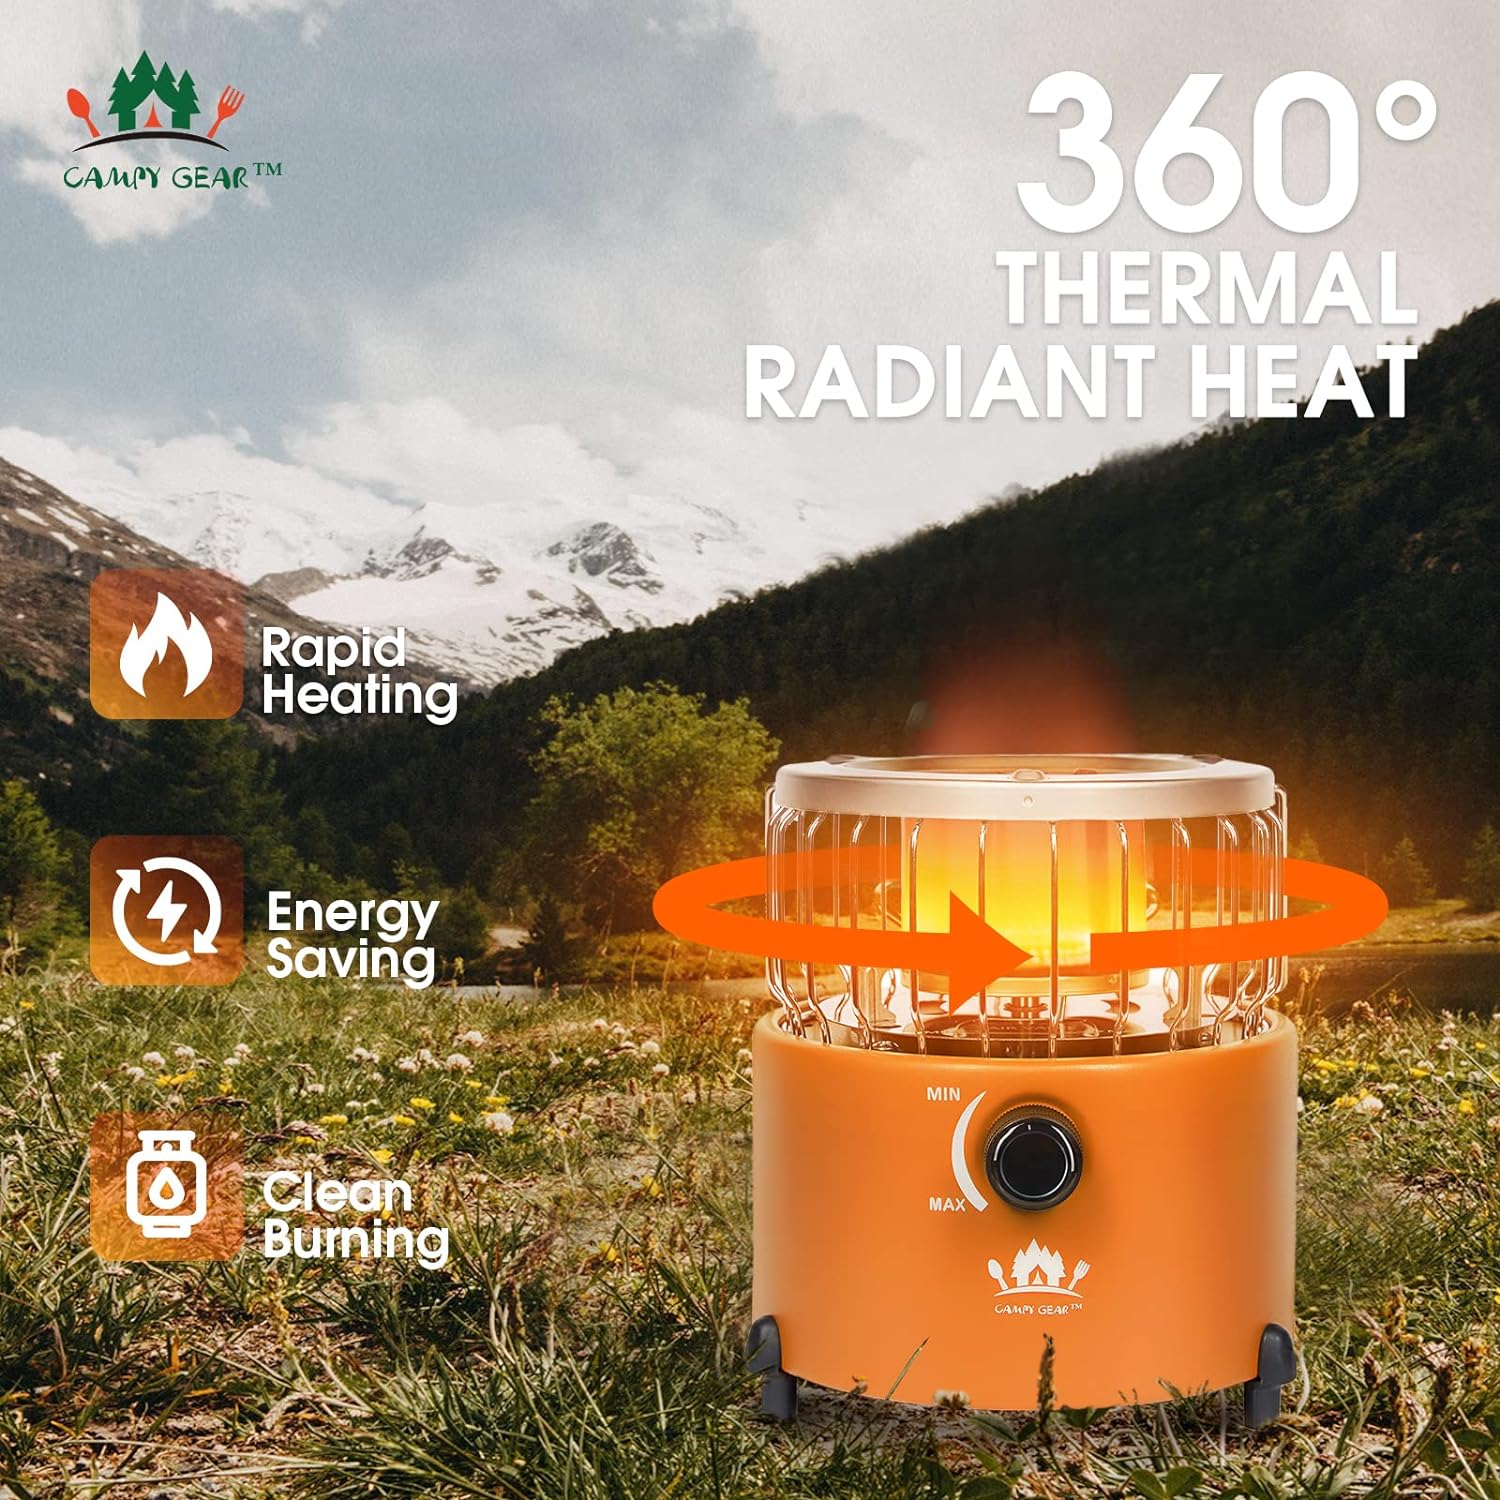 Campy Gear Chubby 2 in 1 Portable Propane Heater  Stove, Outdoor Camping Gas Stove Camp Tent Heater for Ice Fishing Backpacking Hiking Hunting Survival Emergency (Orange , 9,000 BTU -Pro)